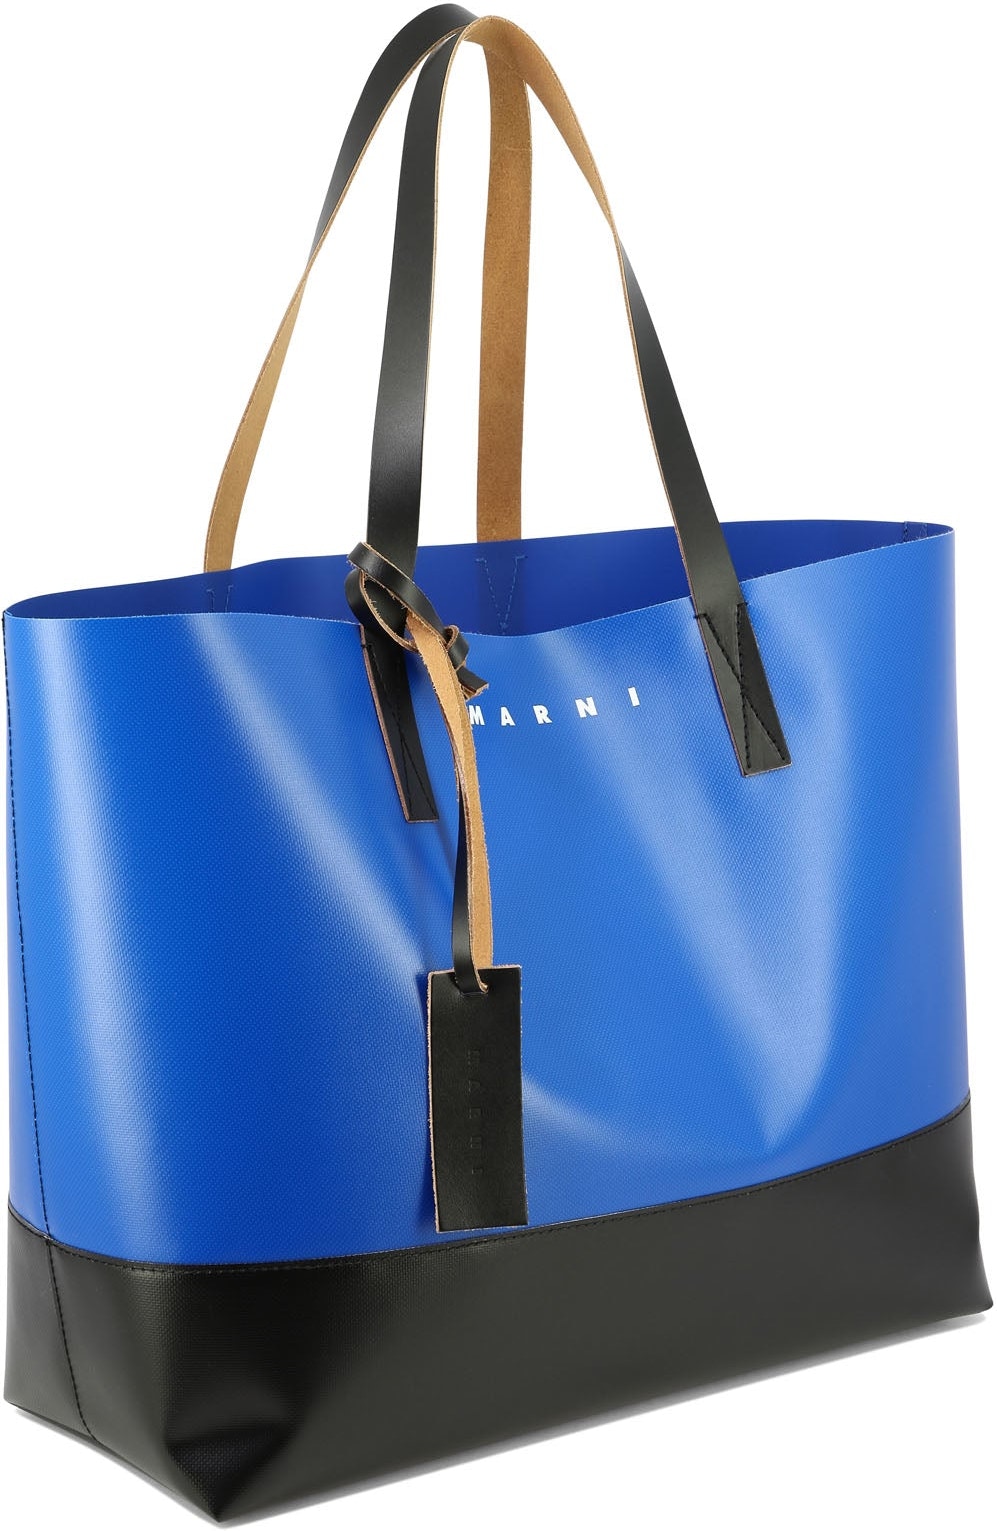 Tribeca shopping bag in blue and black